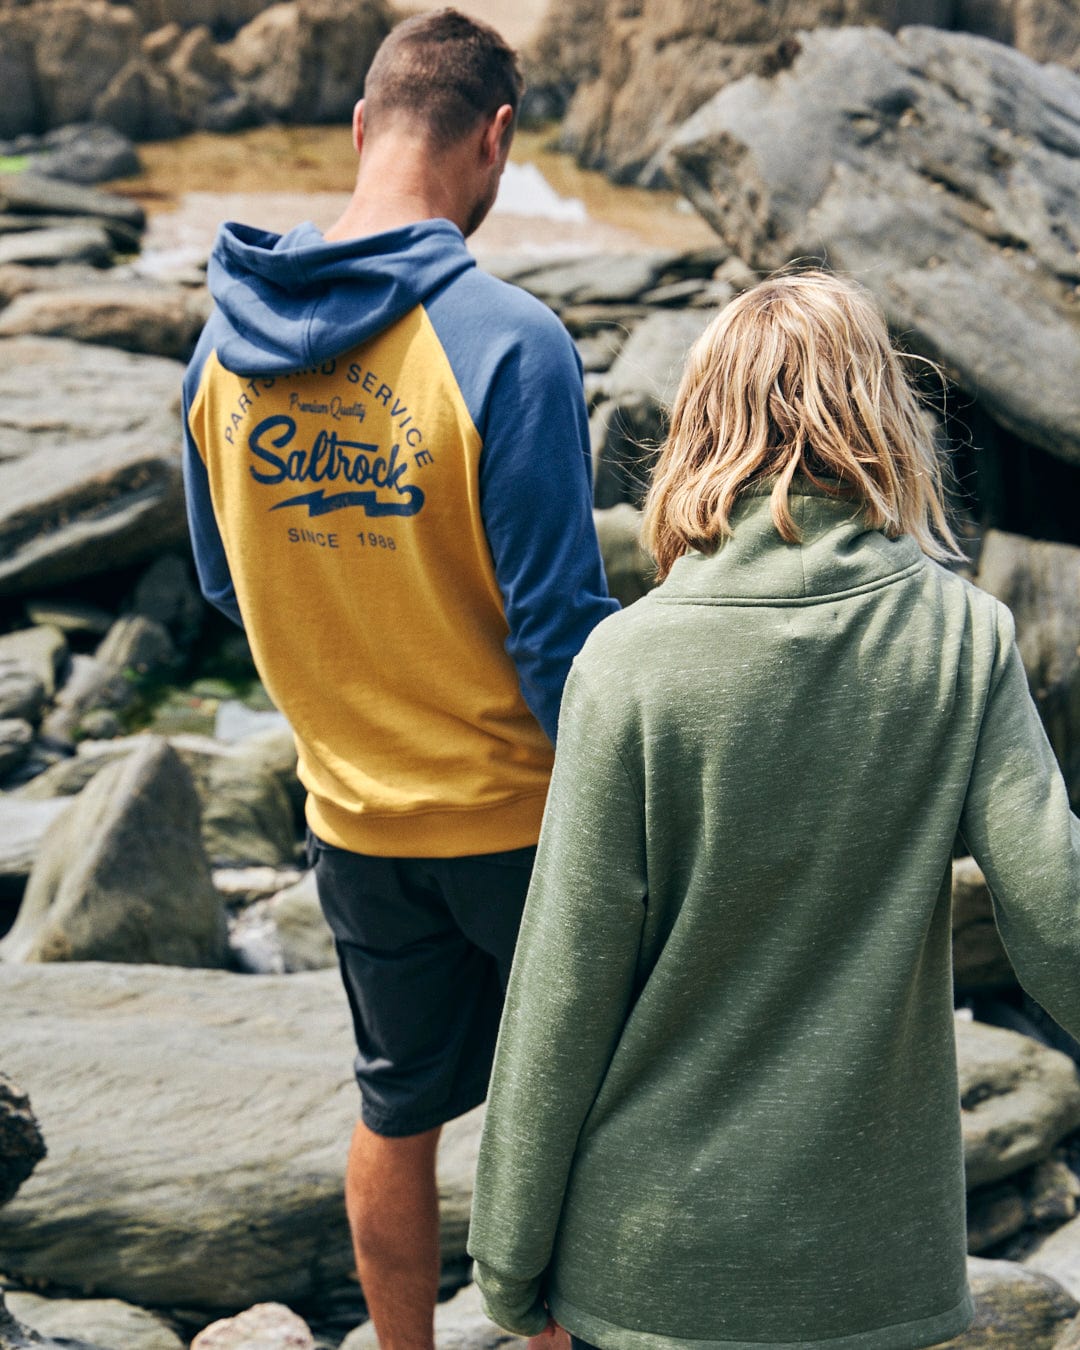 Two individuals in casual attire walk together on a rocky beach. The person on the left wears a yellow and blue hoodie with embroidered branding, while the person on the right sports the Saltrock Harper Women's Longline Pop Sweat in green.